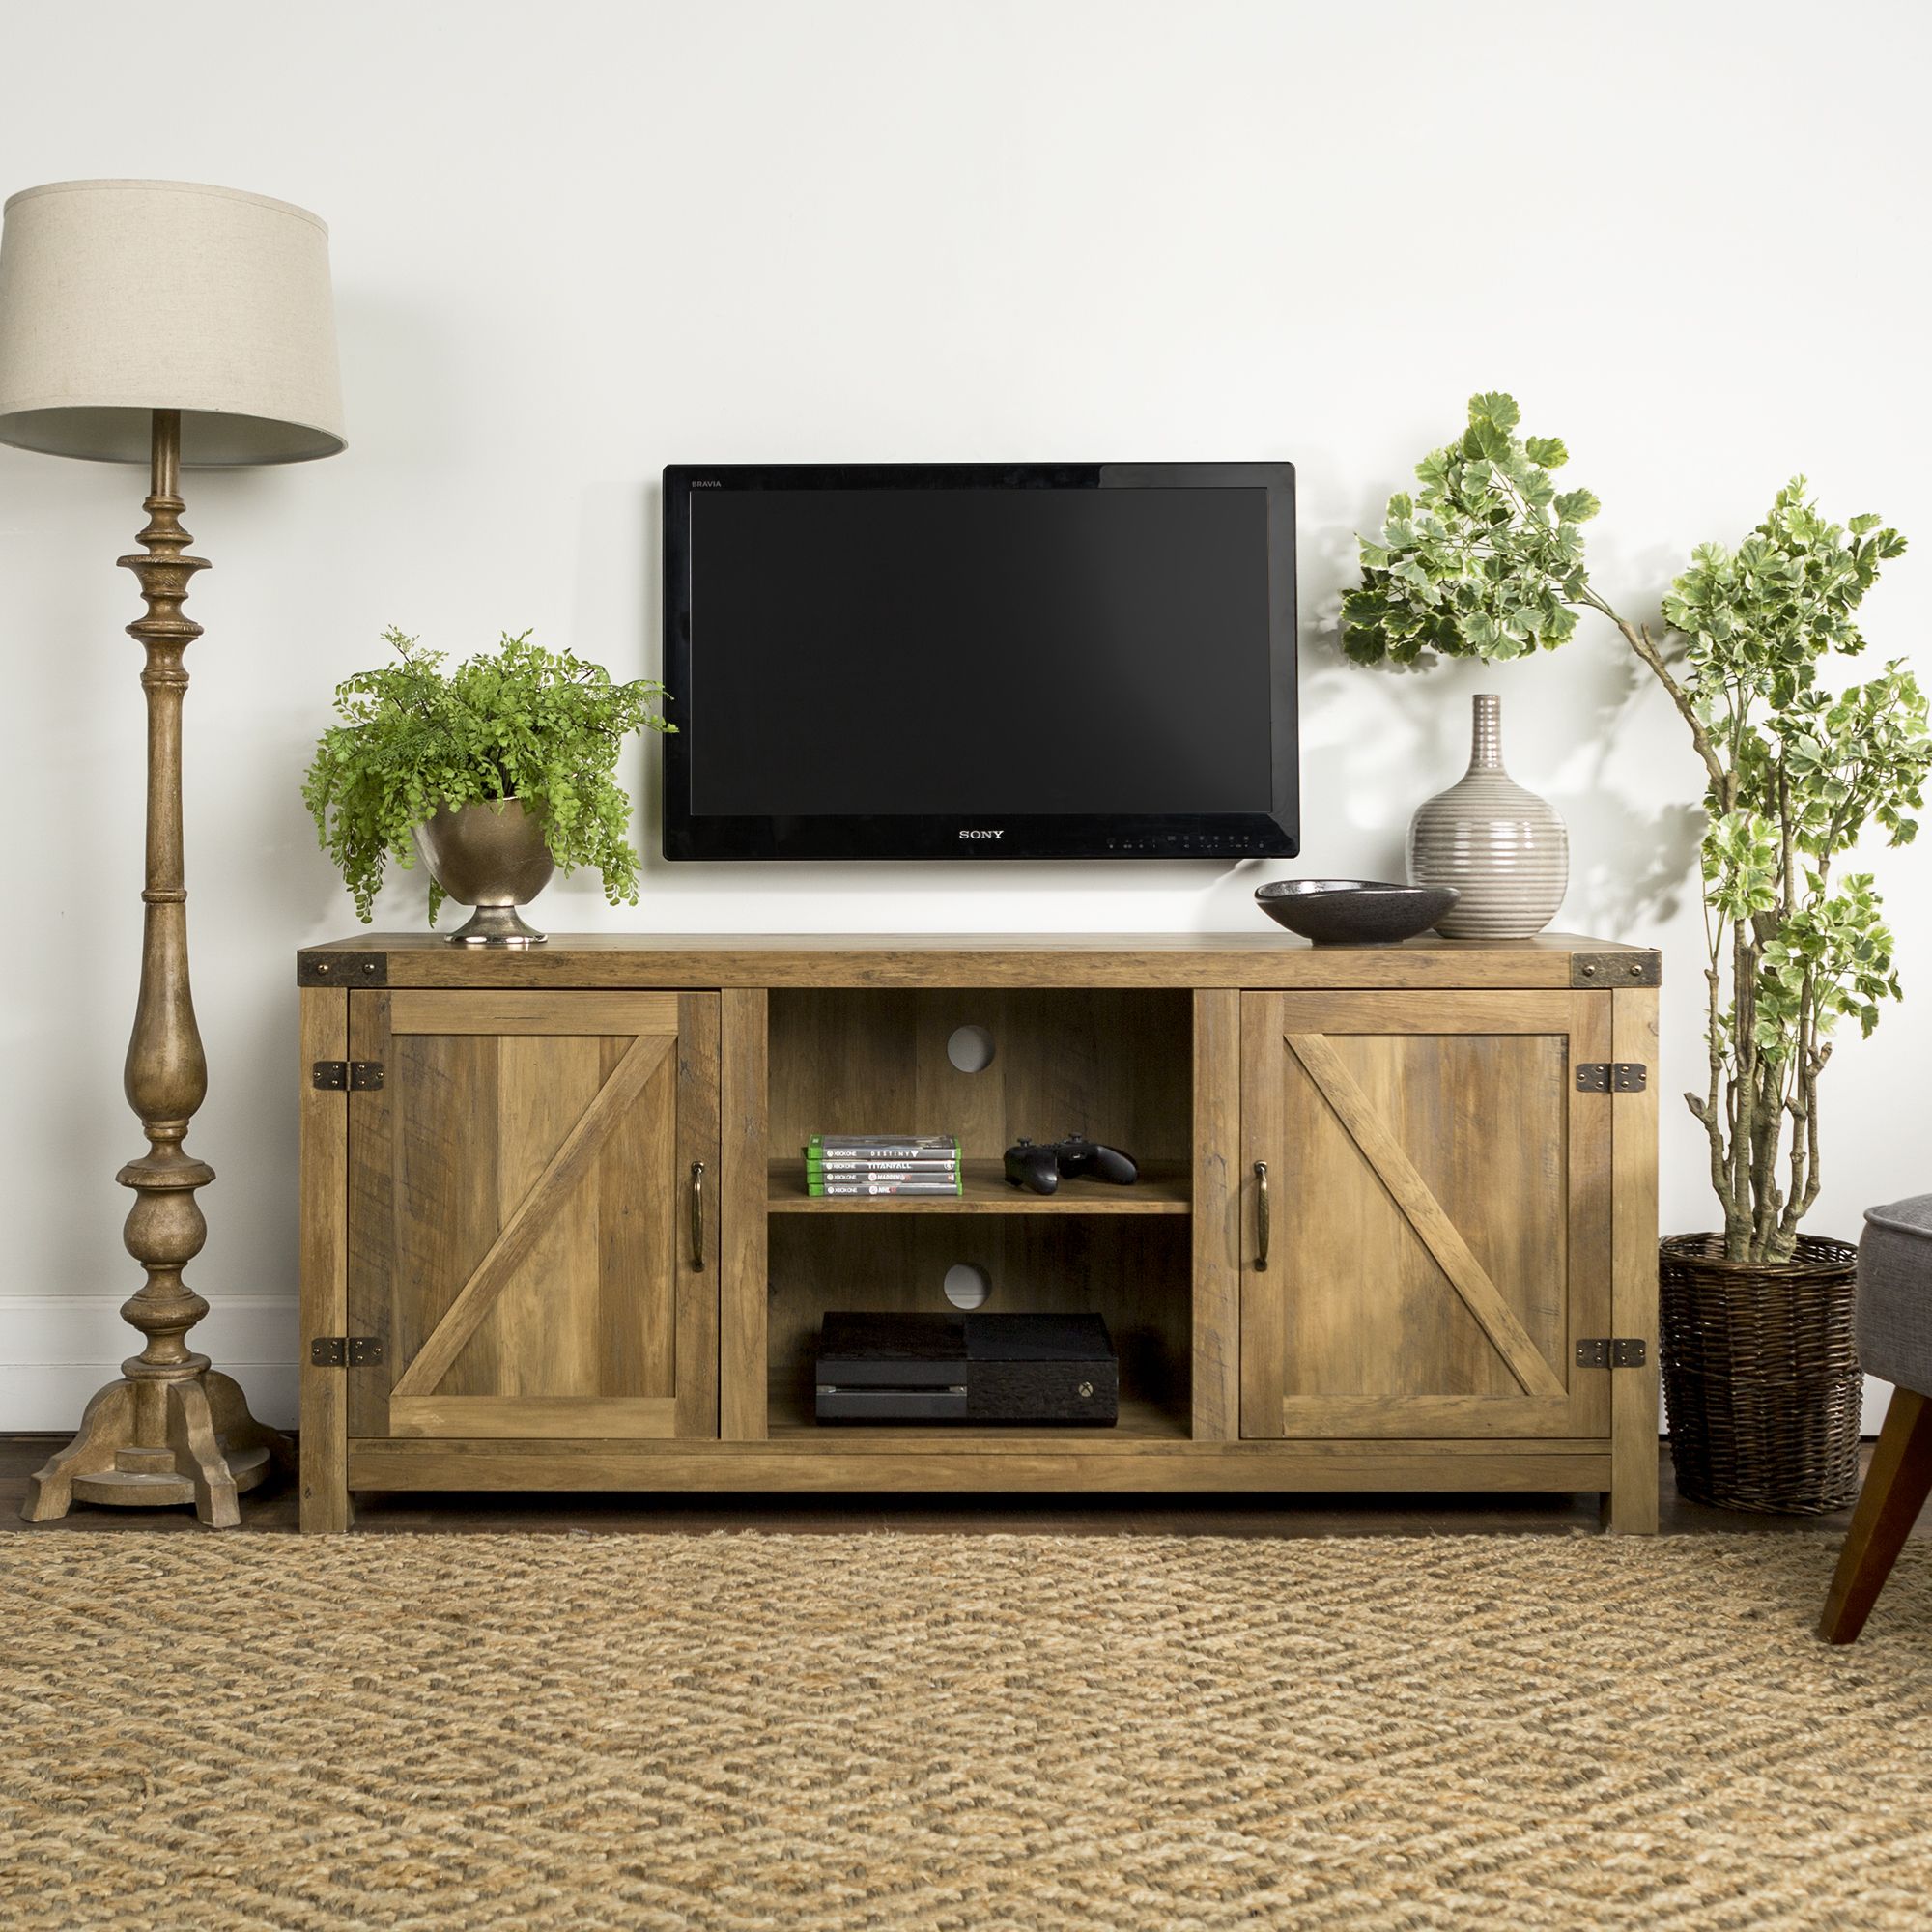 TVs, Home Theaters & TV Accessories - BJ's Wholesale Club